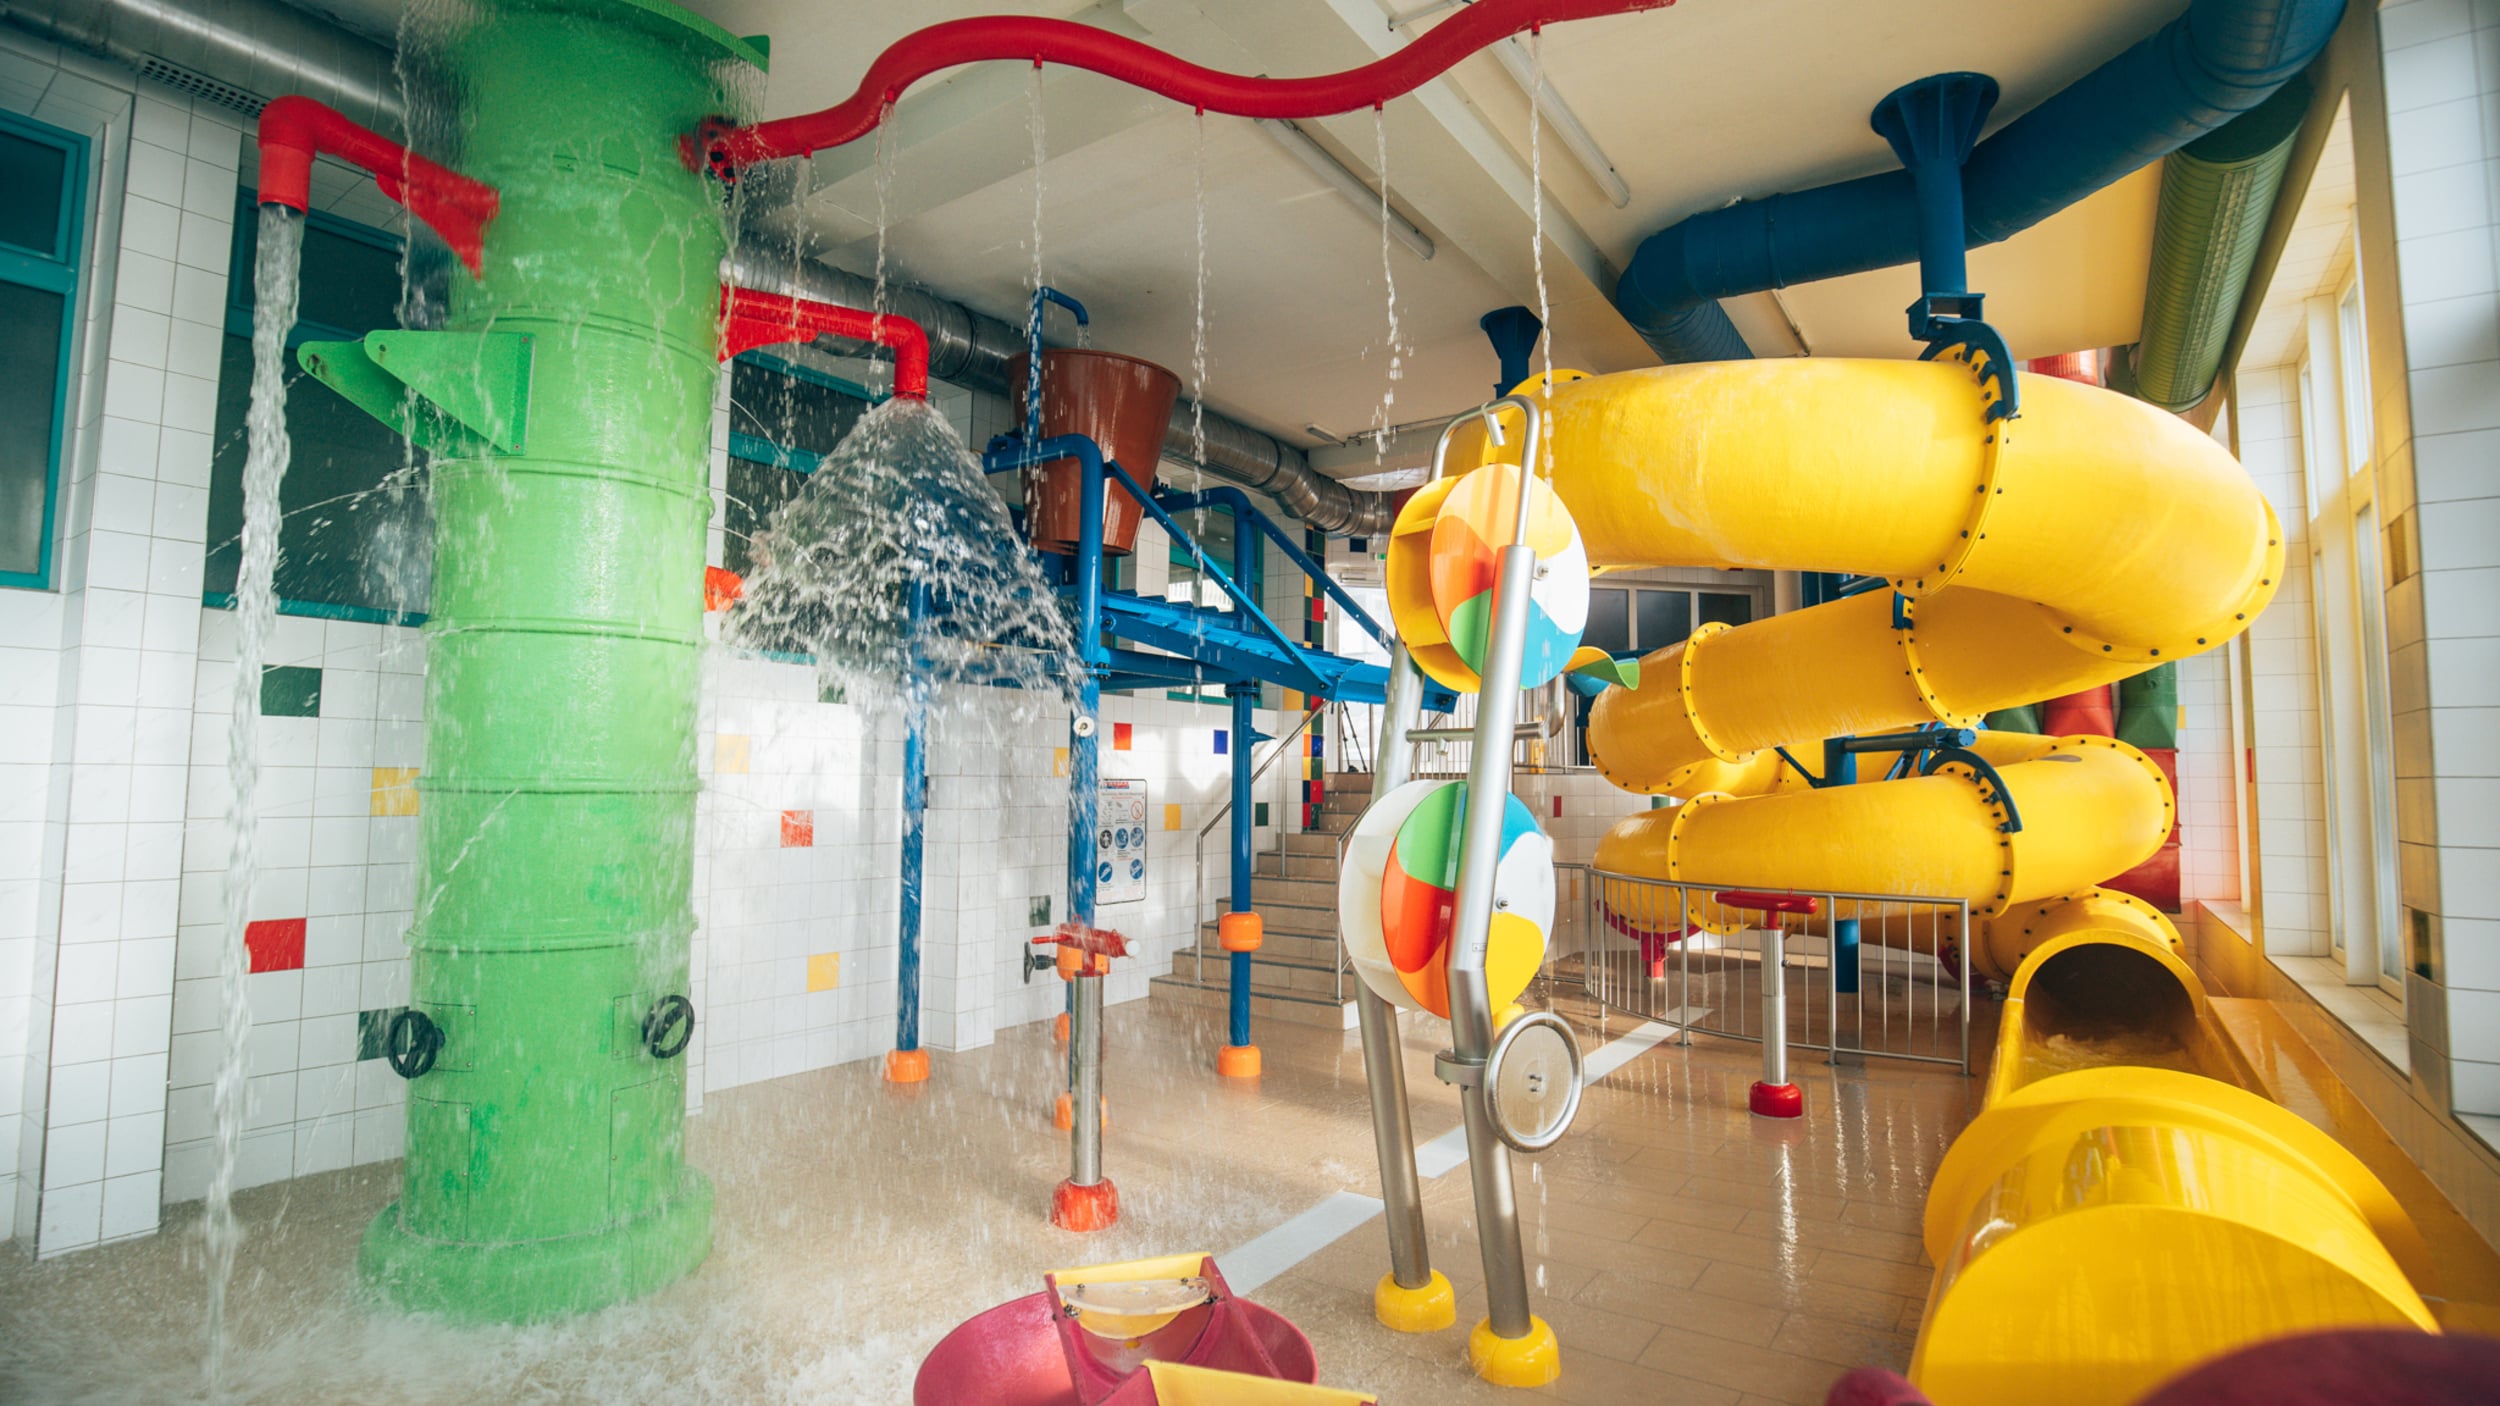 Water slide & water playground in the children's area of the thermal spa area